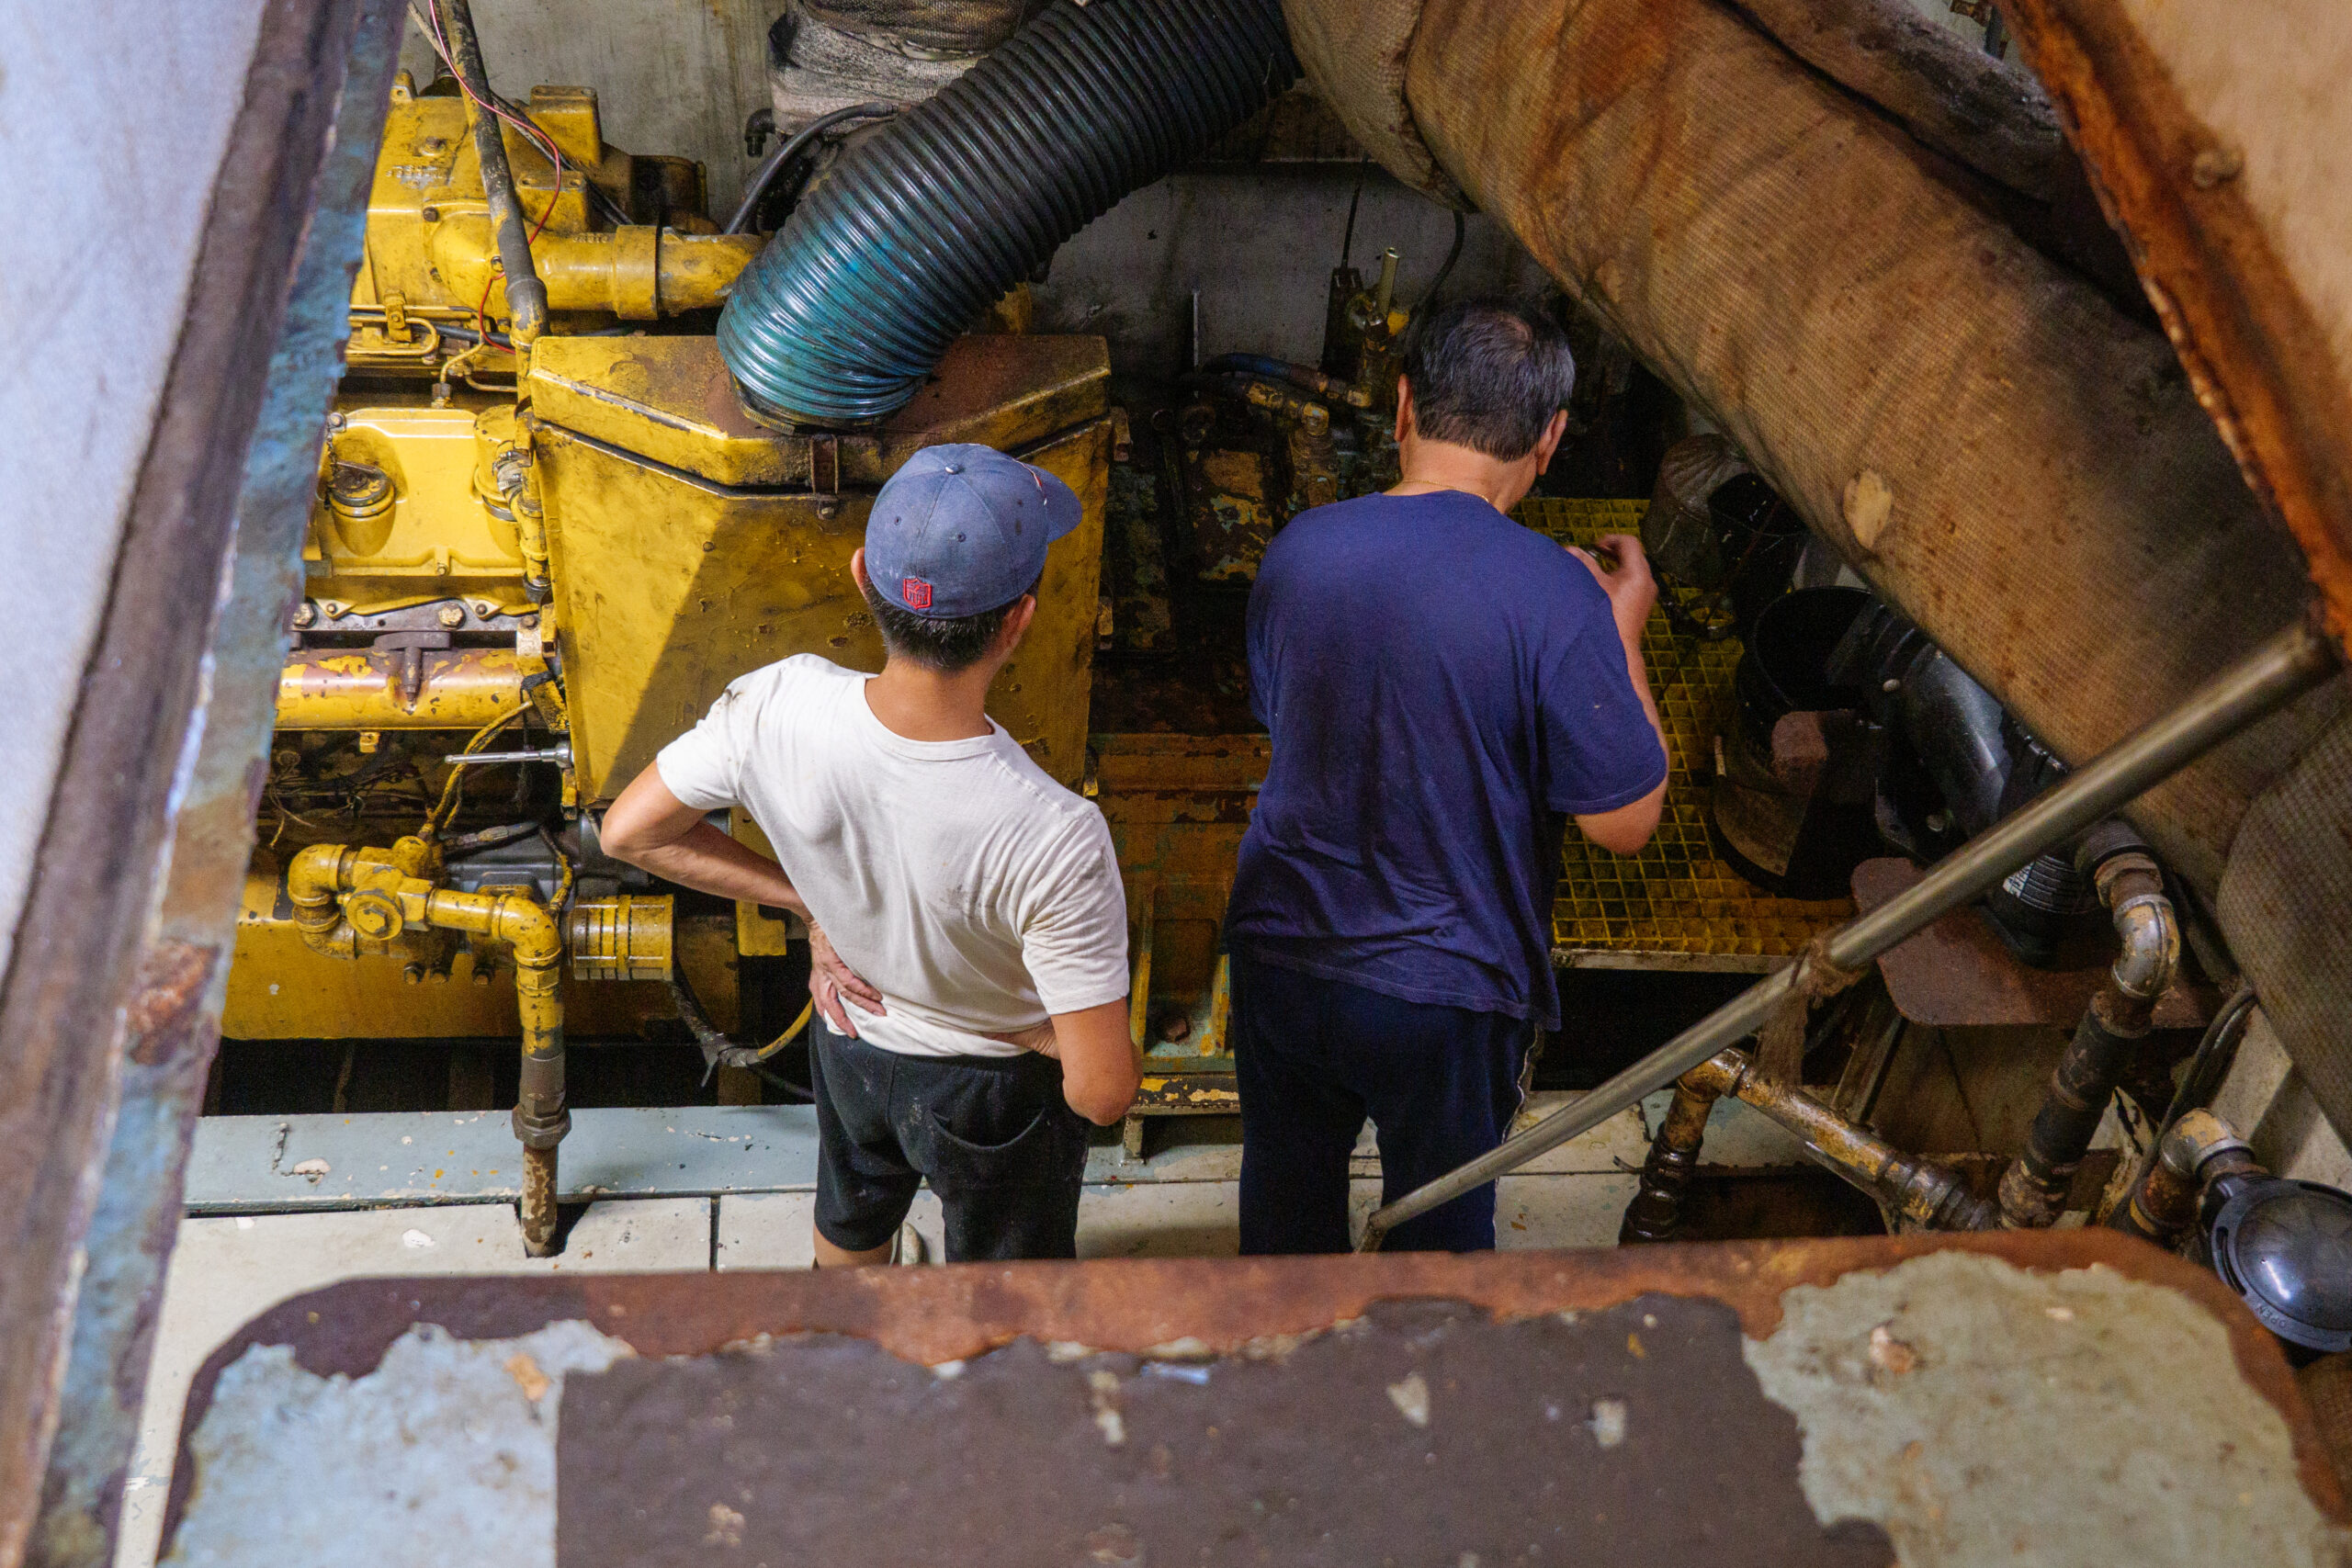 A view of the engine hold from the rusted, weathered metal of the deck. Seen from behind, the two Vietnamese men tend to the engine. The man to the left is wearing a blue ballcap, white tee and black shorts, while the other is in a blue tee, and striped track pants.